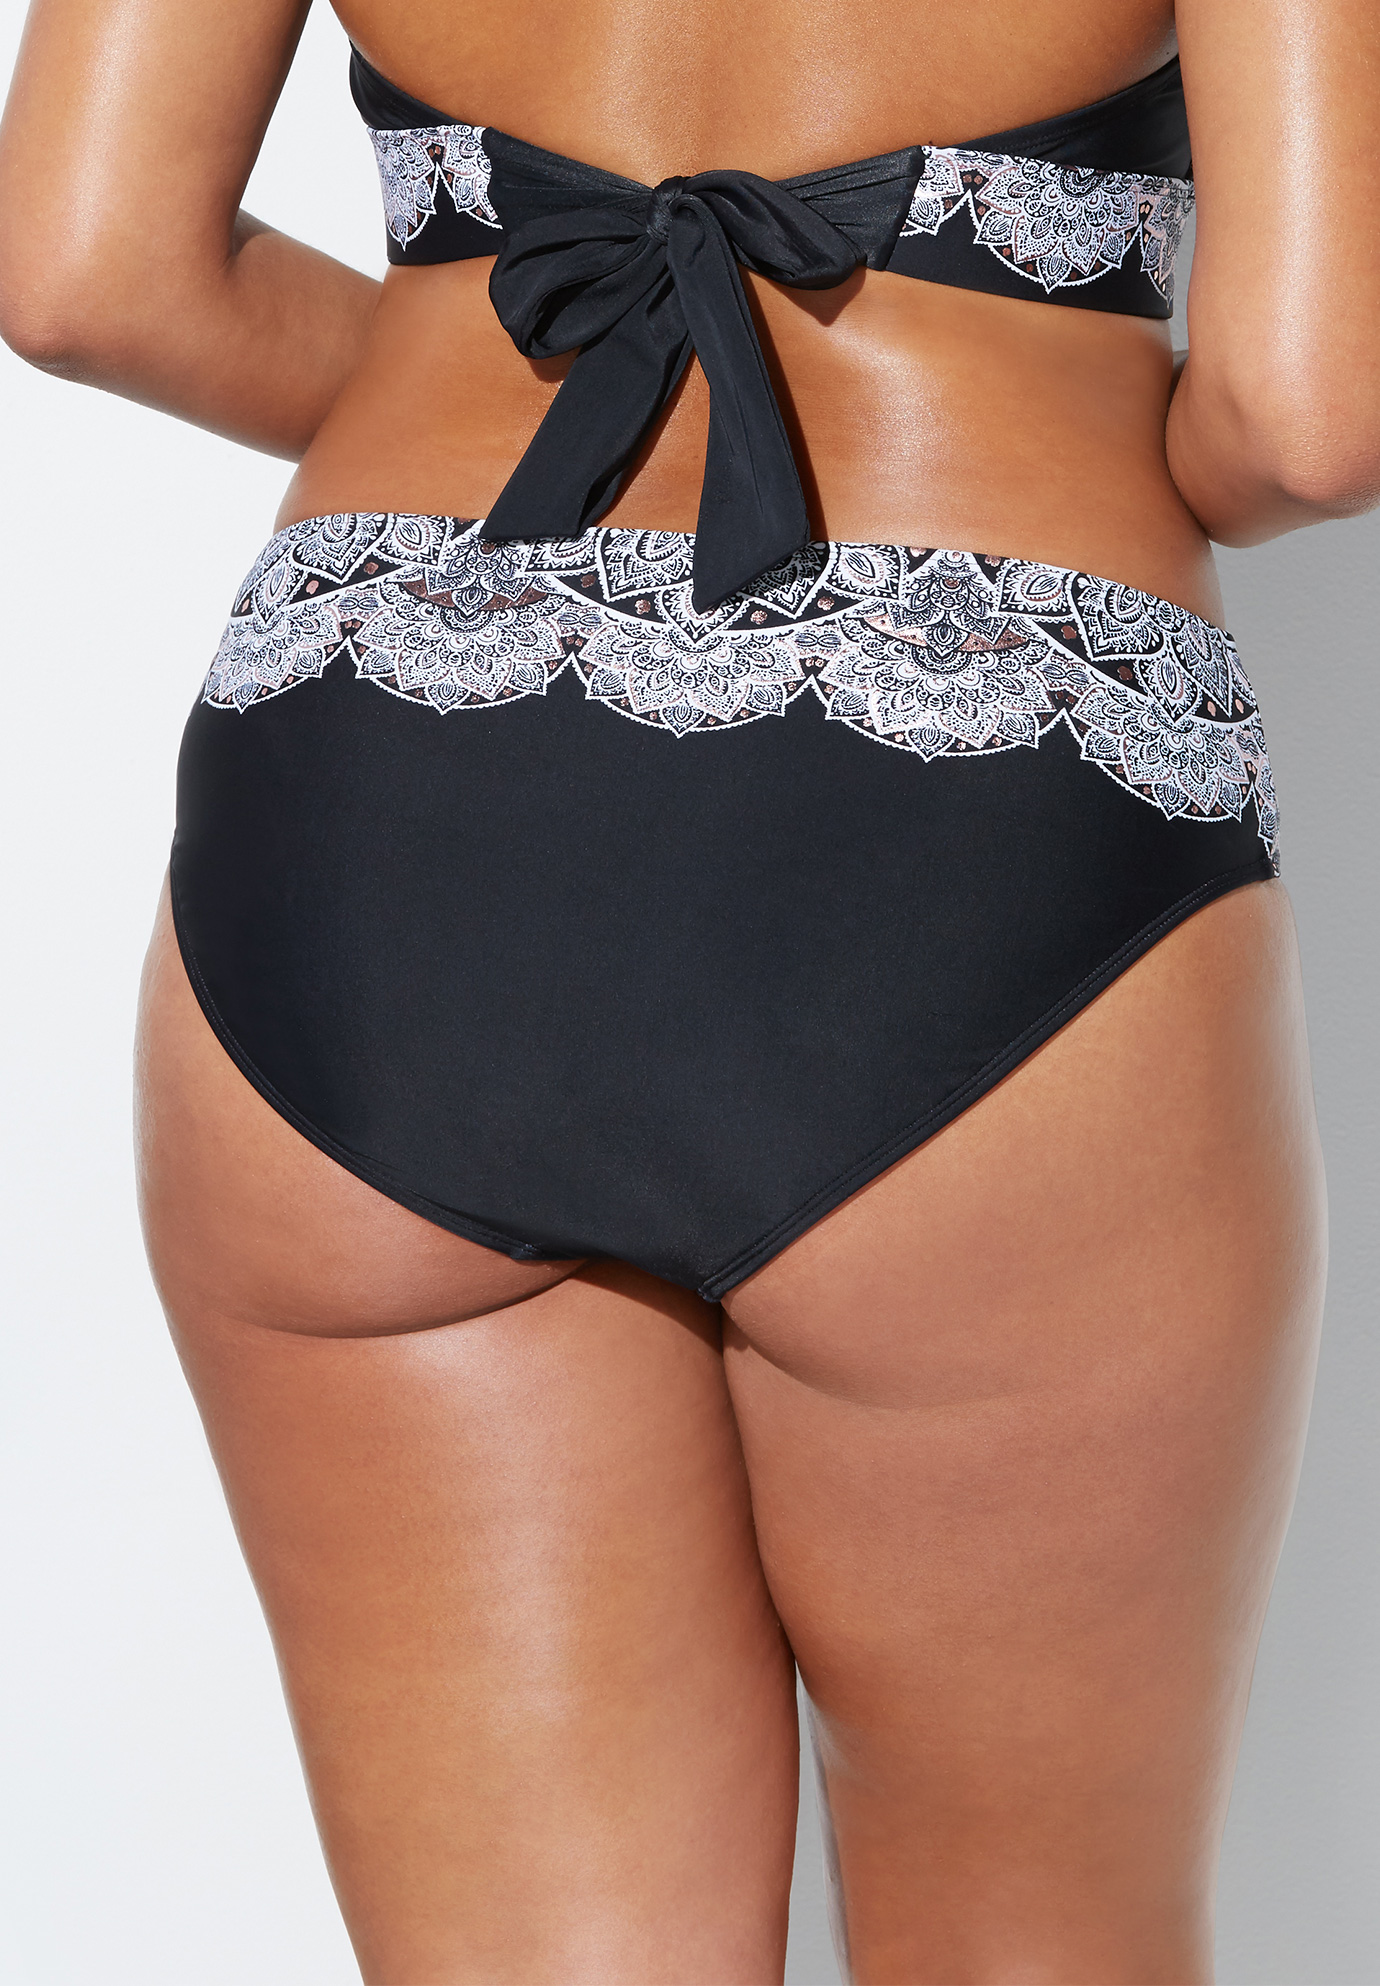 Swimsuits For All Women's Plus Size Hipster Swim Brief 16 Black White Lace Print - image 3 of 4